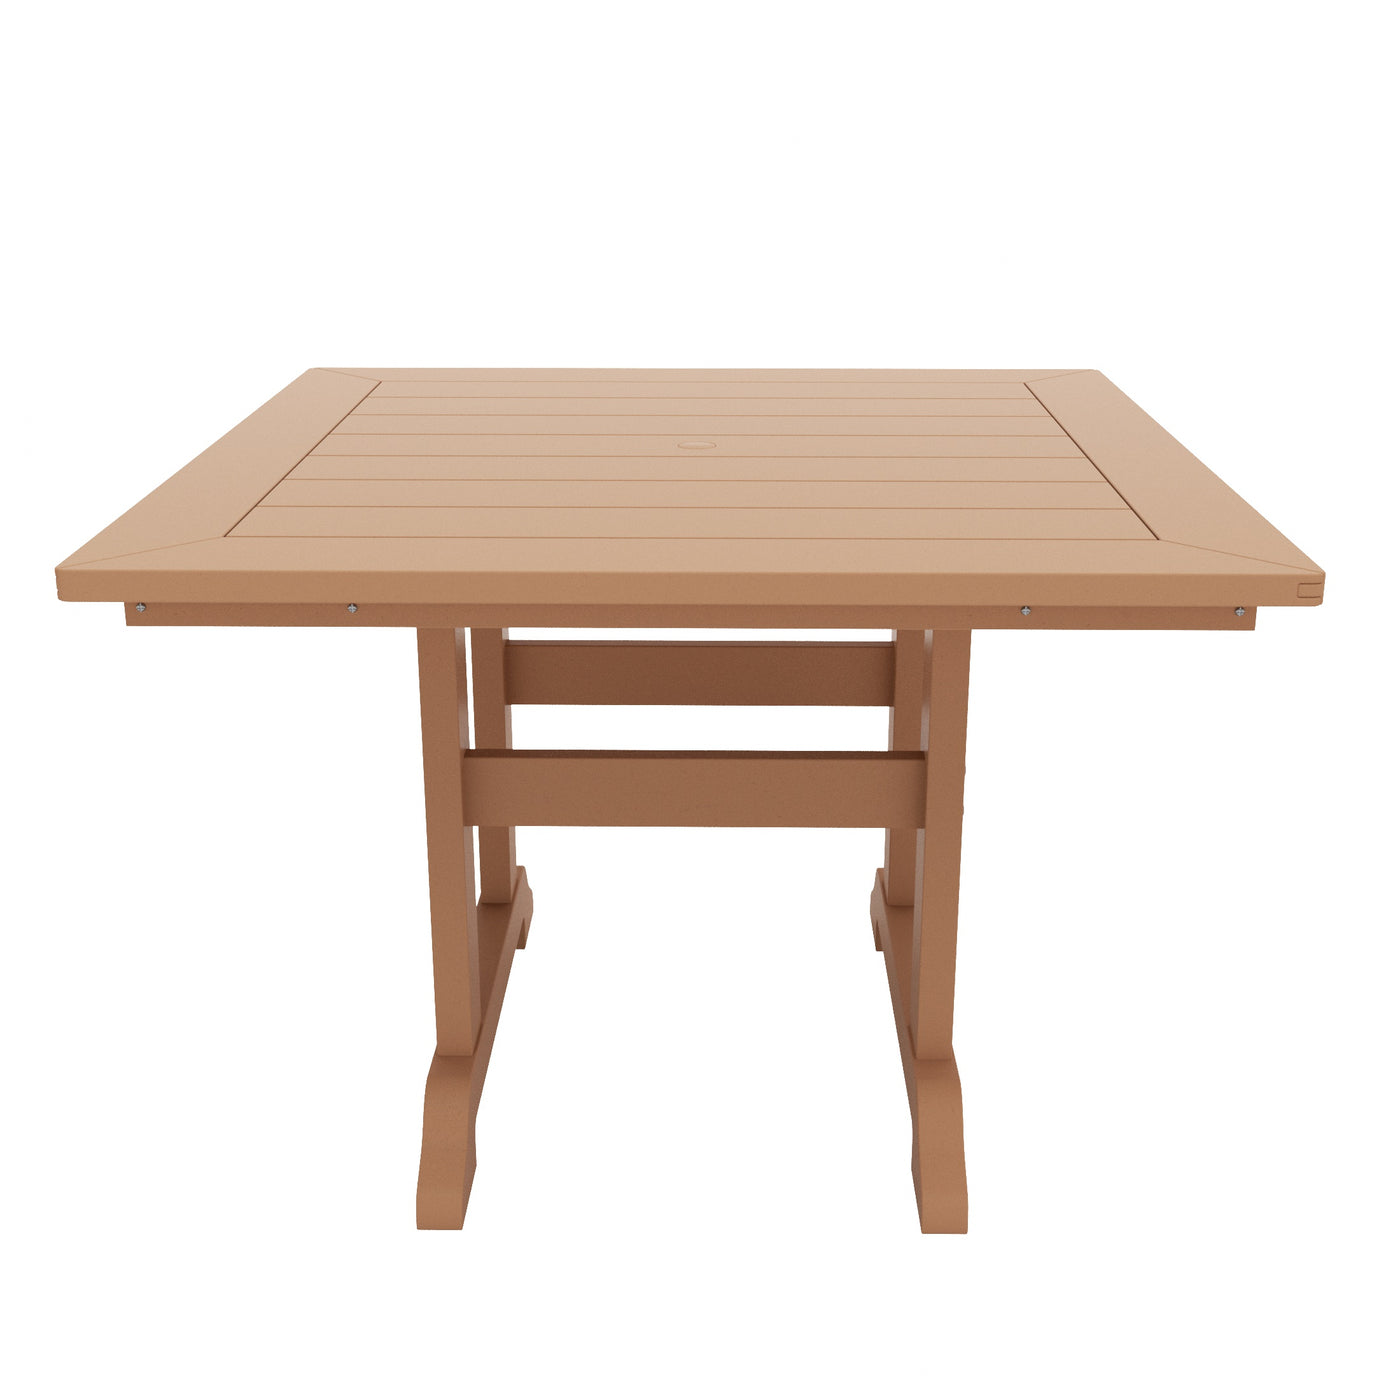 Malibu 43" Square Dining Table for Outdoor Patio